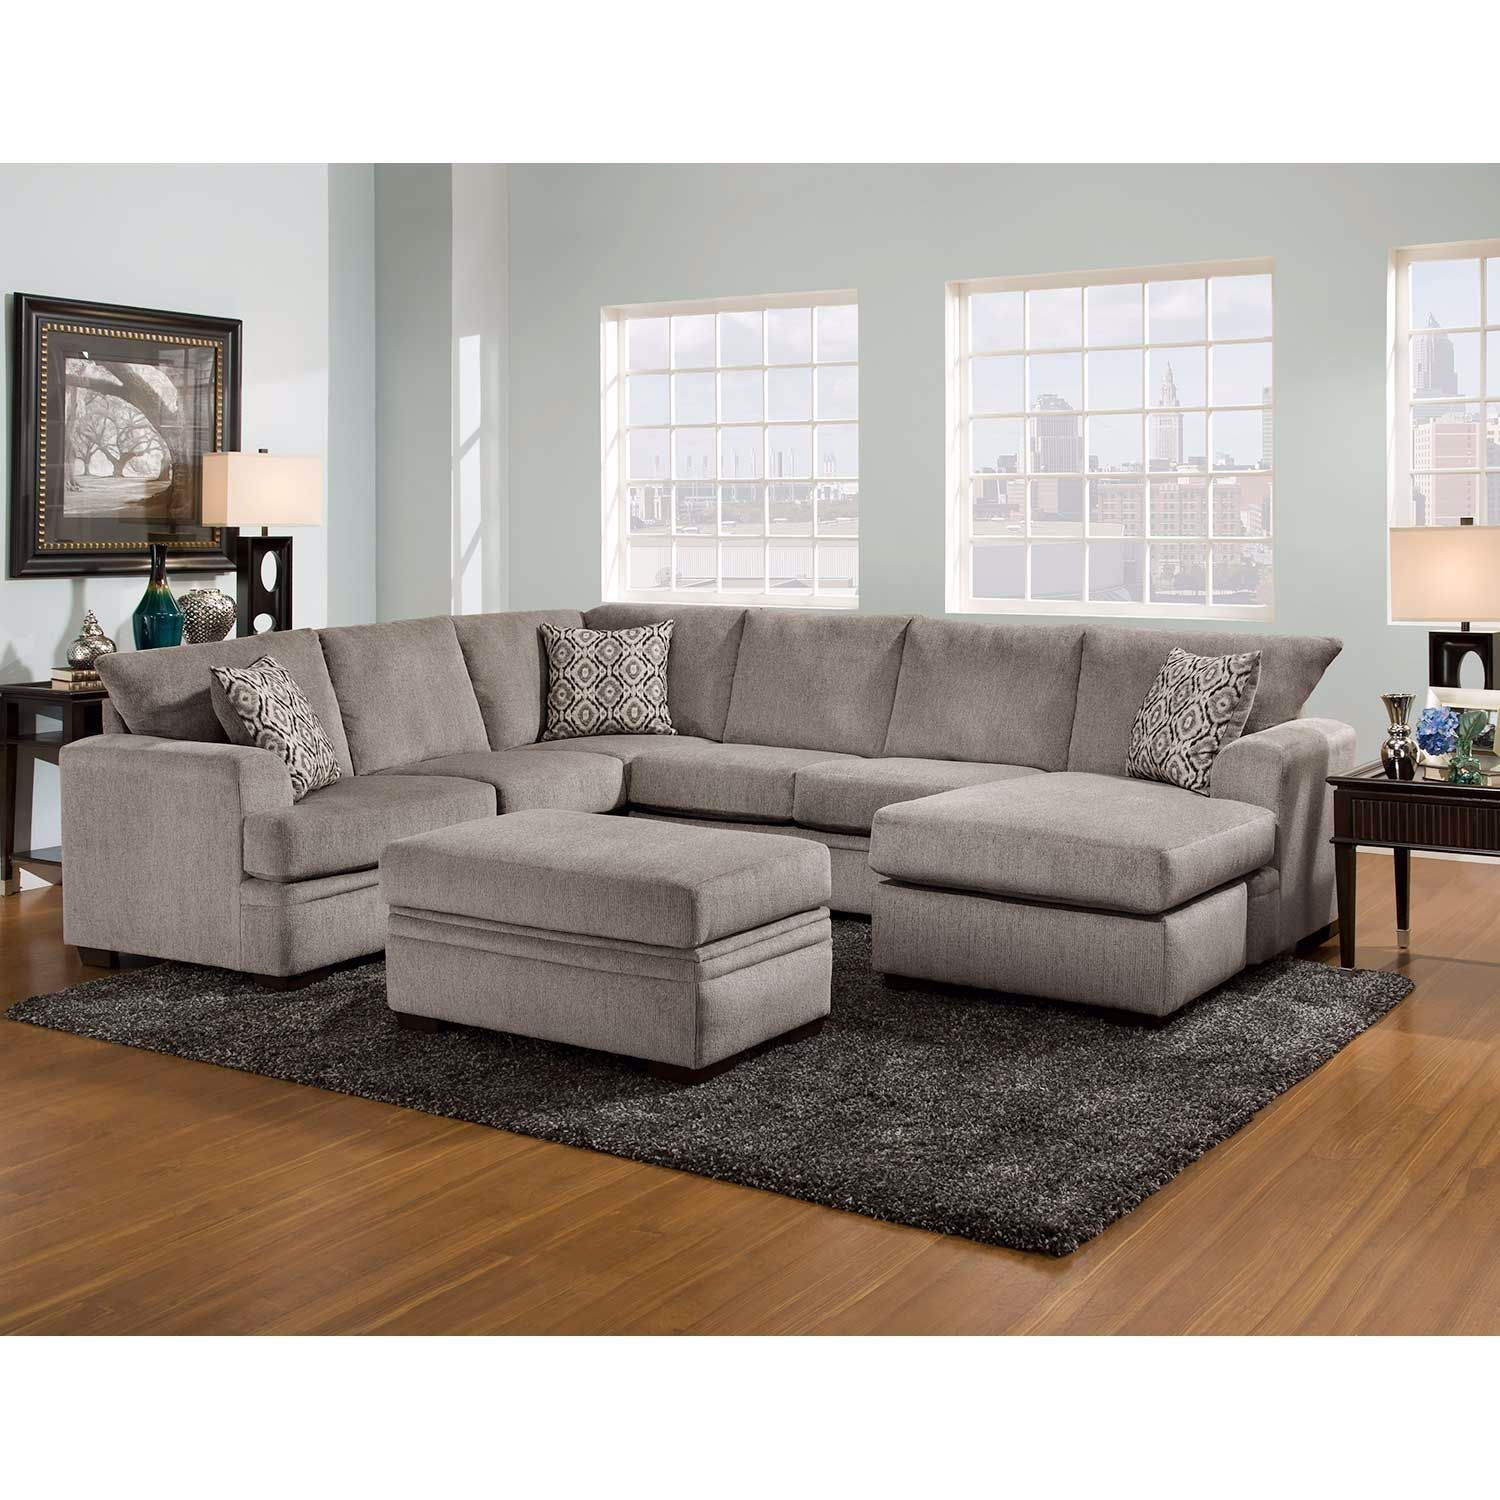 2PC Pewter RAF Sectional w/Chaise | 6810 6830 PEWTER | | AFW.com